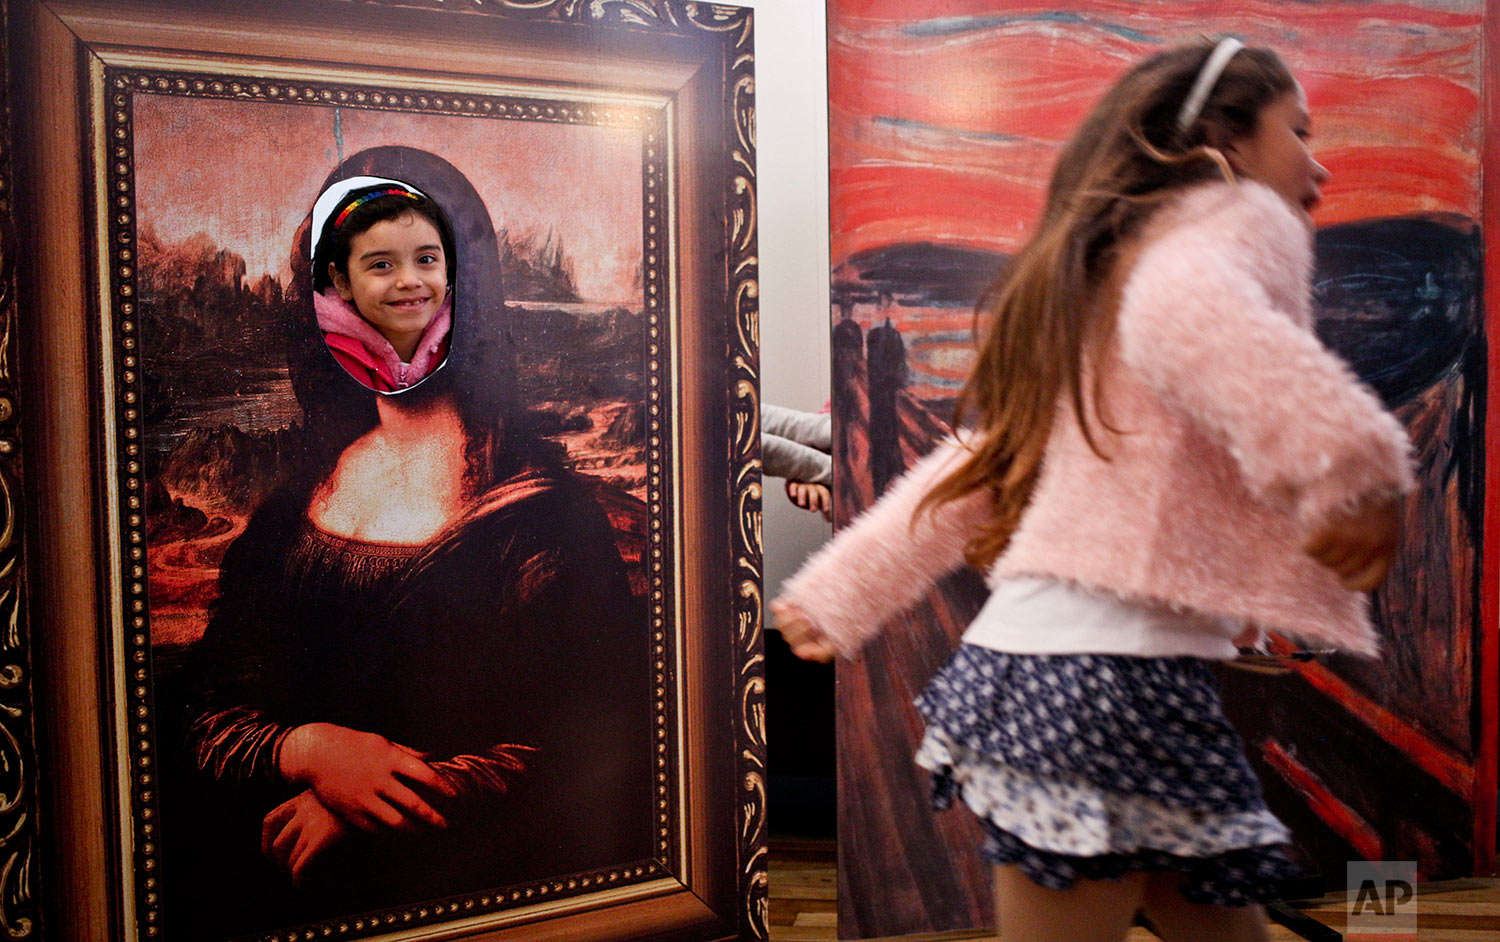  In this Aug. 20, 2016 photo, transgender girls Selenna, right, and Genesis who poses inside a Mona Lisa painting, play at the Artequin museum during celebrations marking Transgender Children's Day in Santiago, Chile. Families of trans children are d